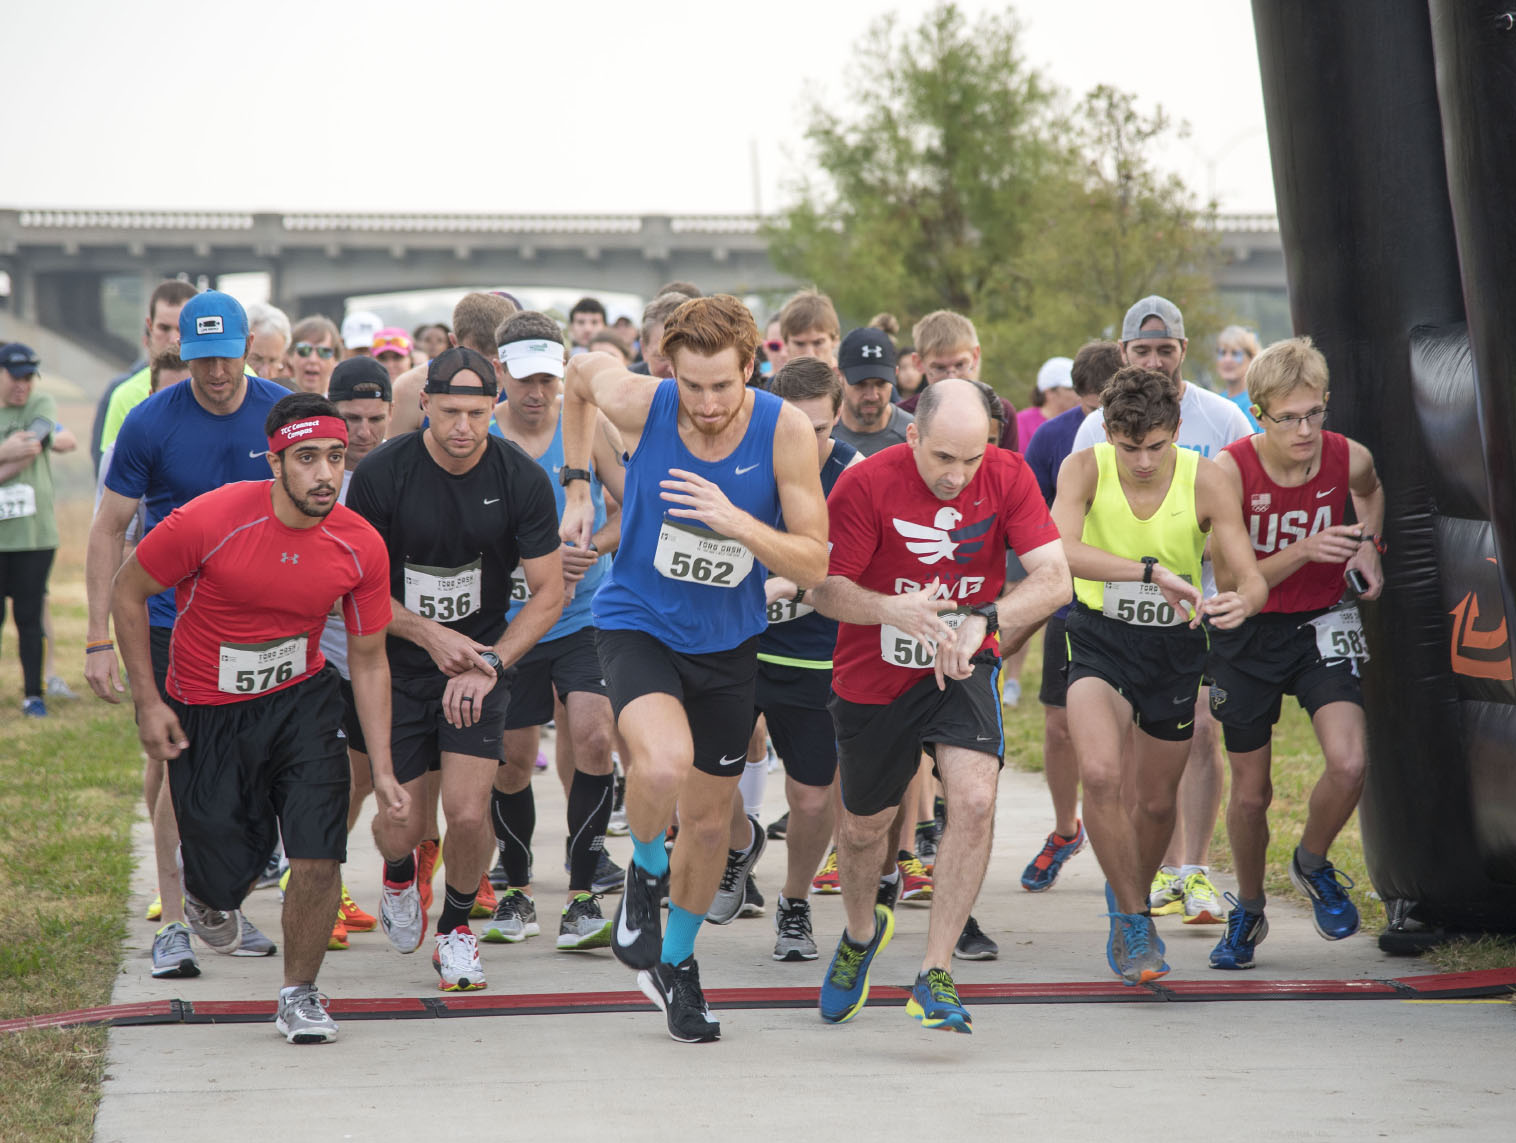 Runners start the Toro Dash 10K race Nov. 4 at Panther Island in Fort Worth. Hundreds of runners started their morning early for various races along the Trinity River Trails to raise money for scholarships.